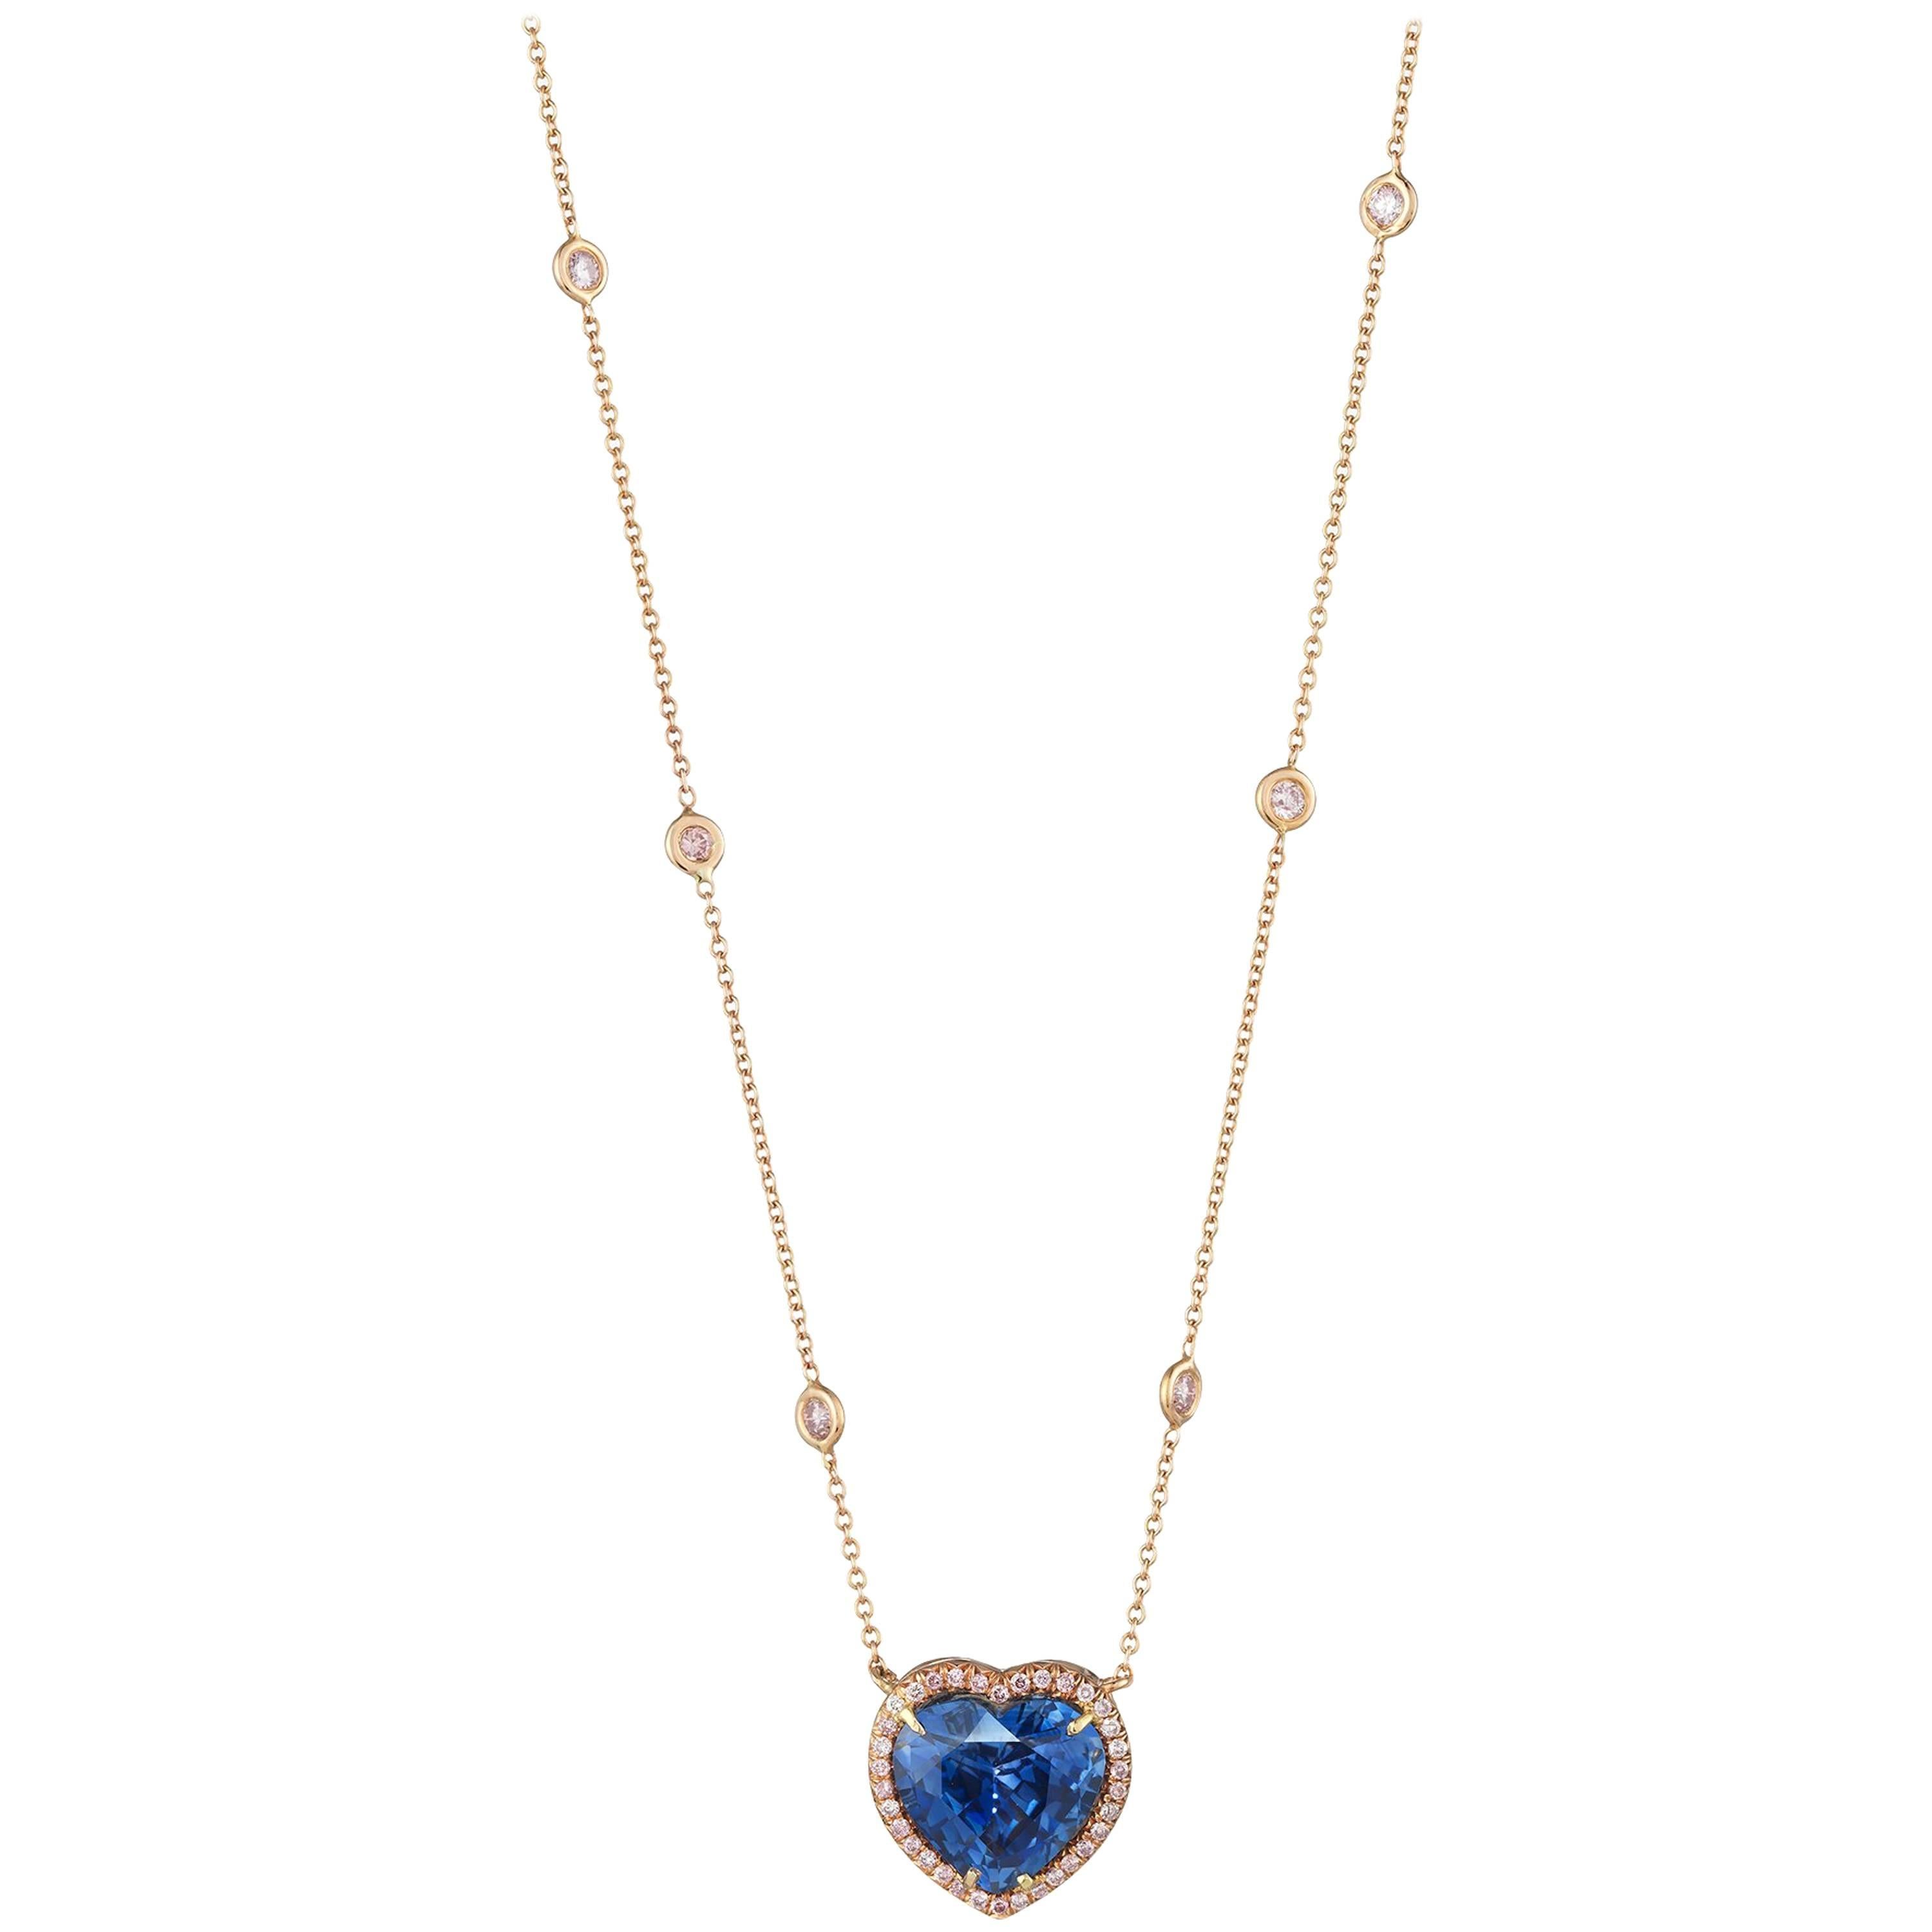 Gold and Sapphire Heart Shaped Pendant